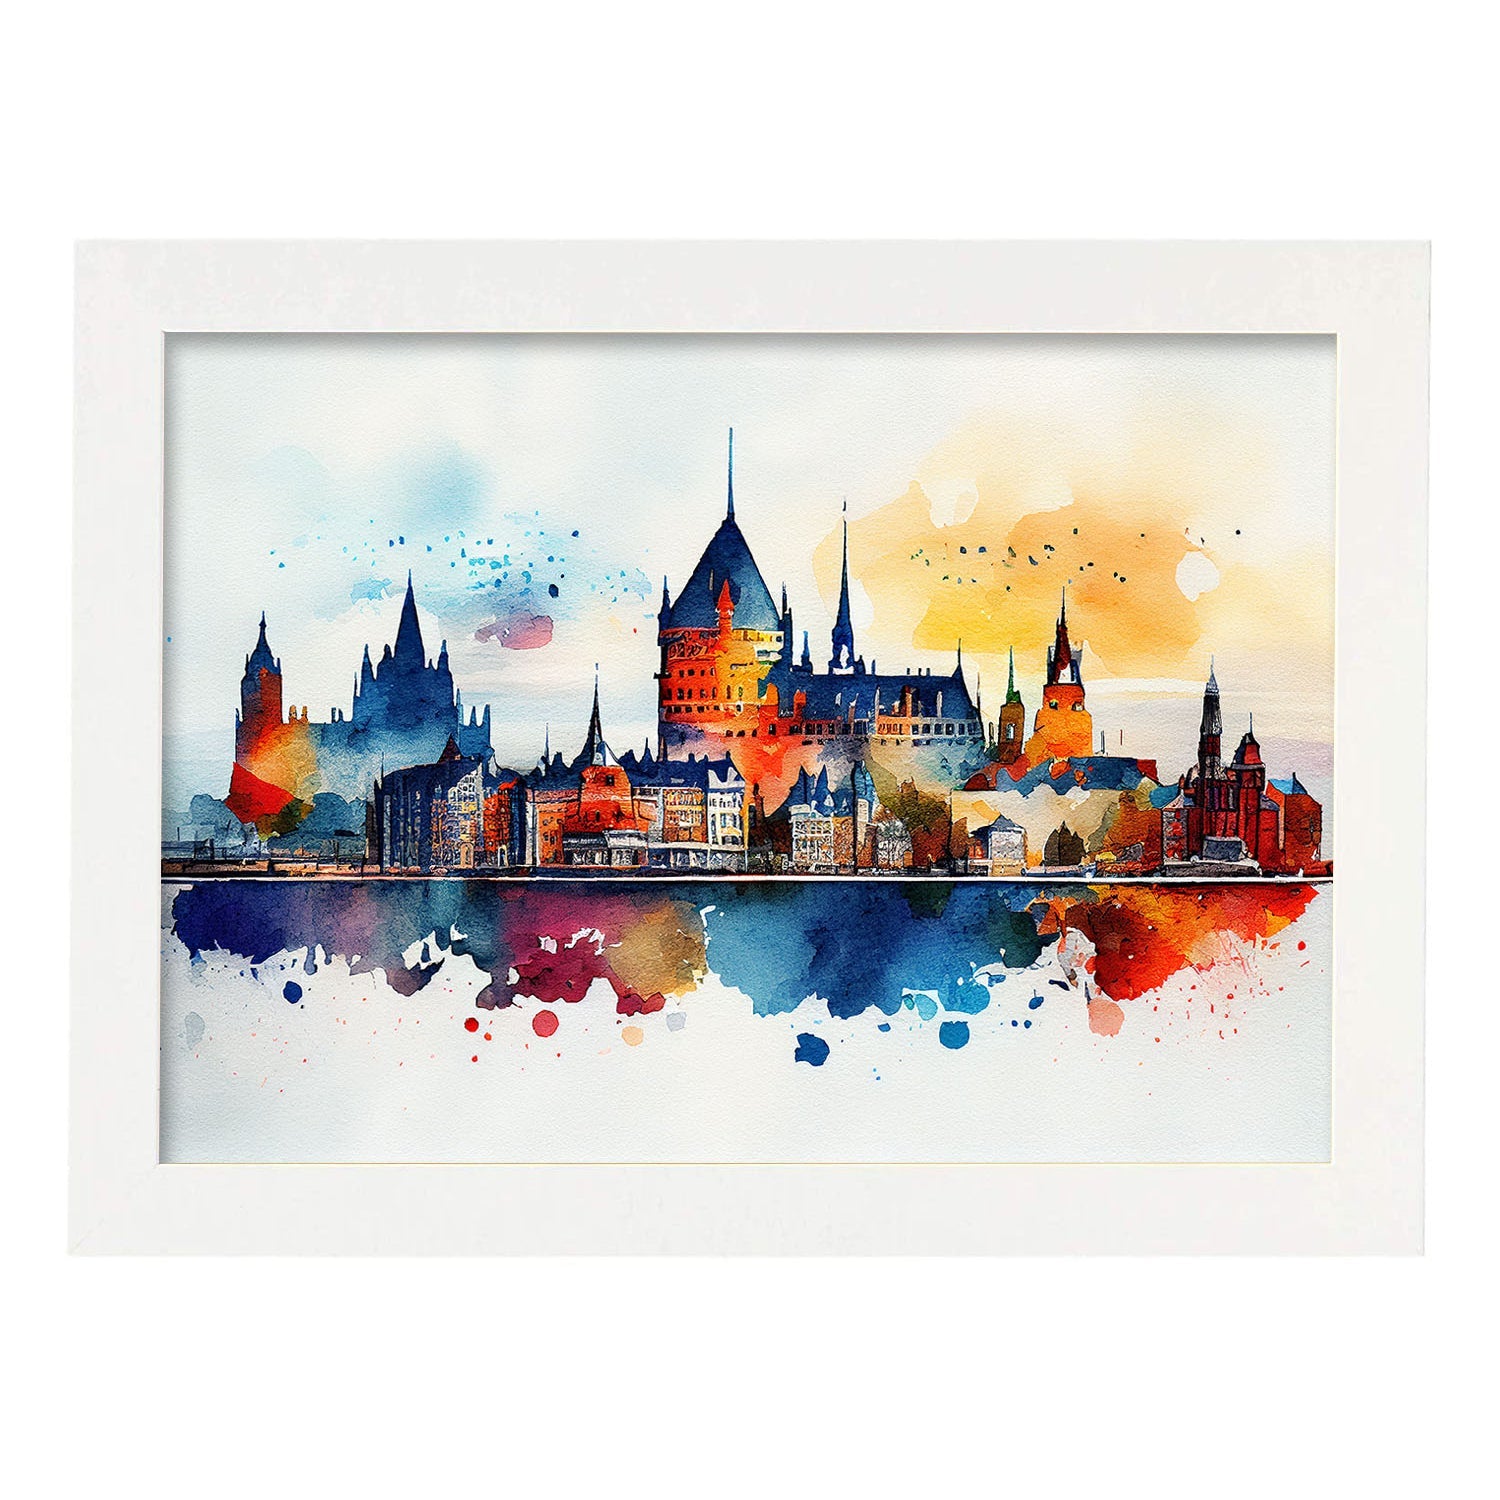 Nacnic watercolor of a skyline of the city of Quebec City. Aesthetic Wall Art Prints for Bedroom or Living Room Design.-Artwork-Nacnic-A4-Marco Blanco-Nacnic Estudio SL